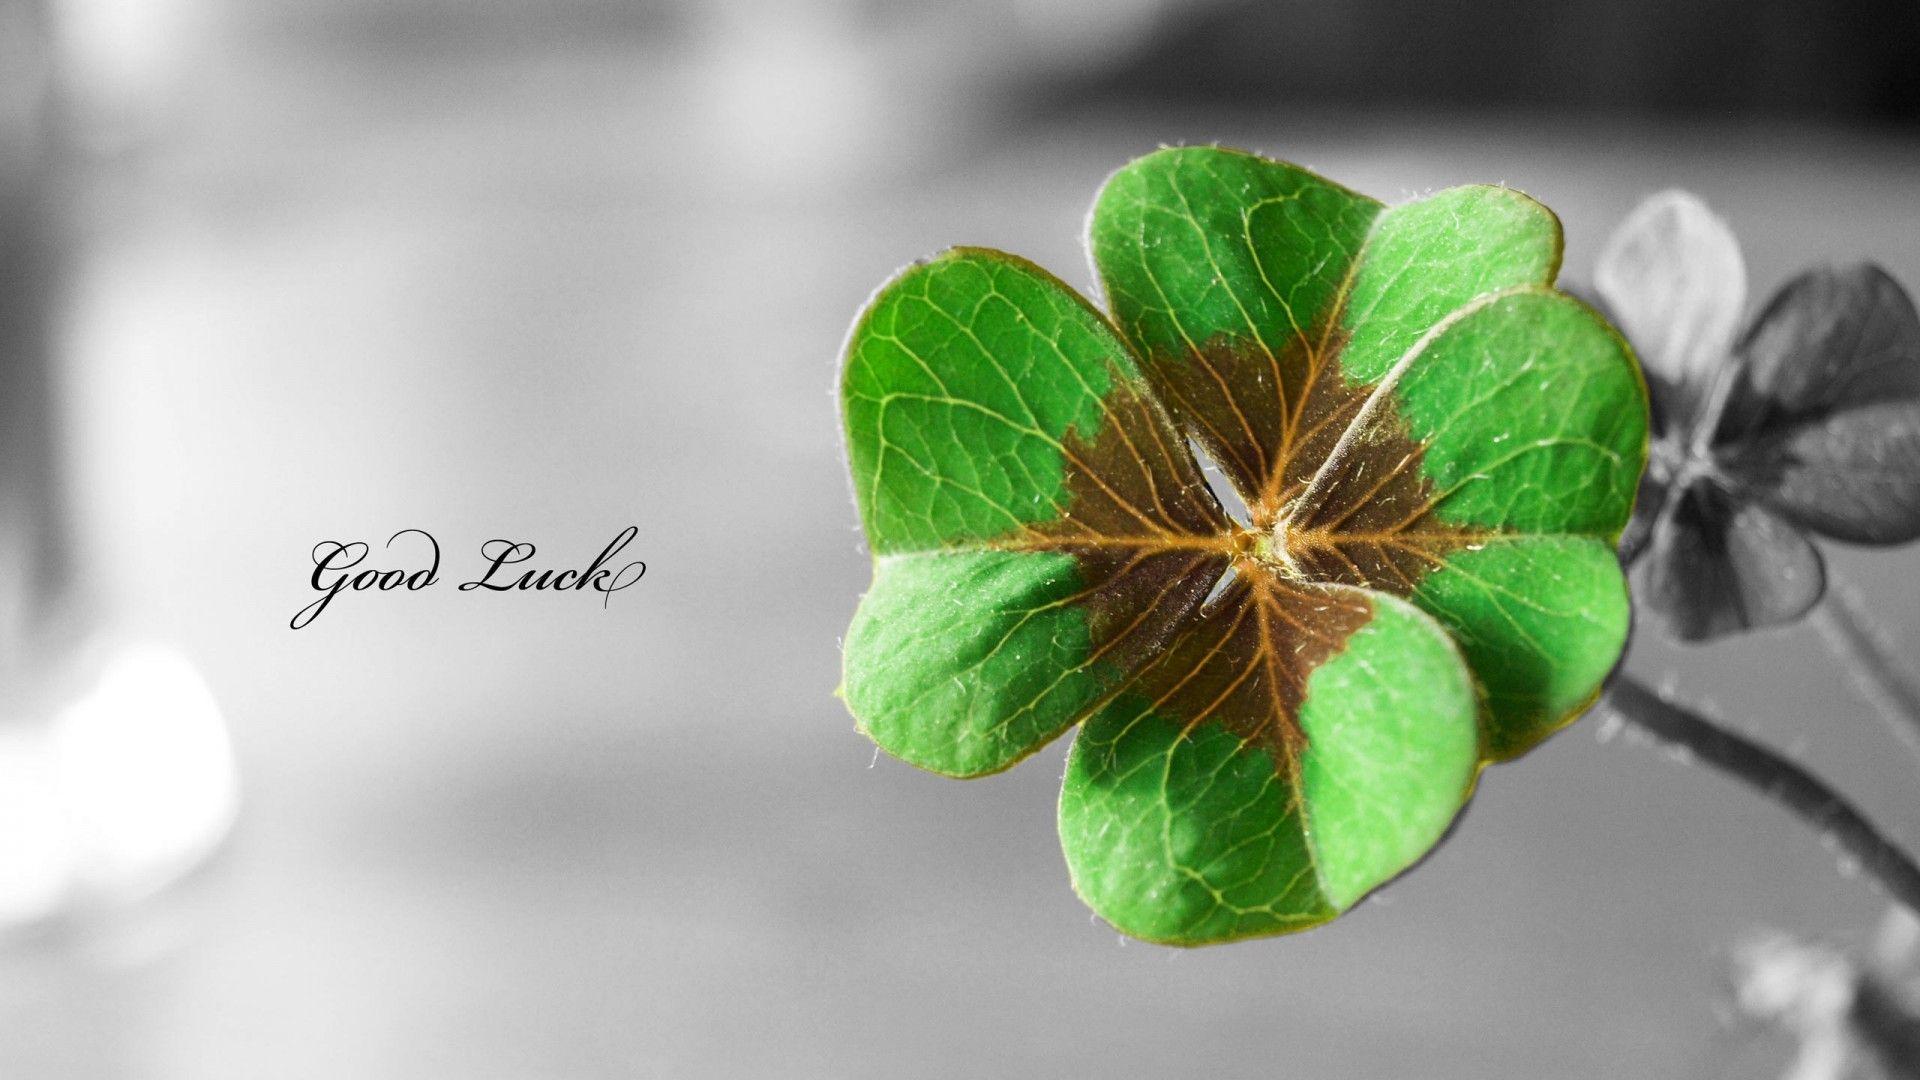 IN 45 Luck Wallpaper, Luck Full HD Picture and Wallpaper